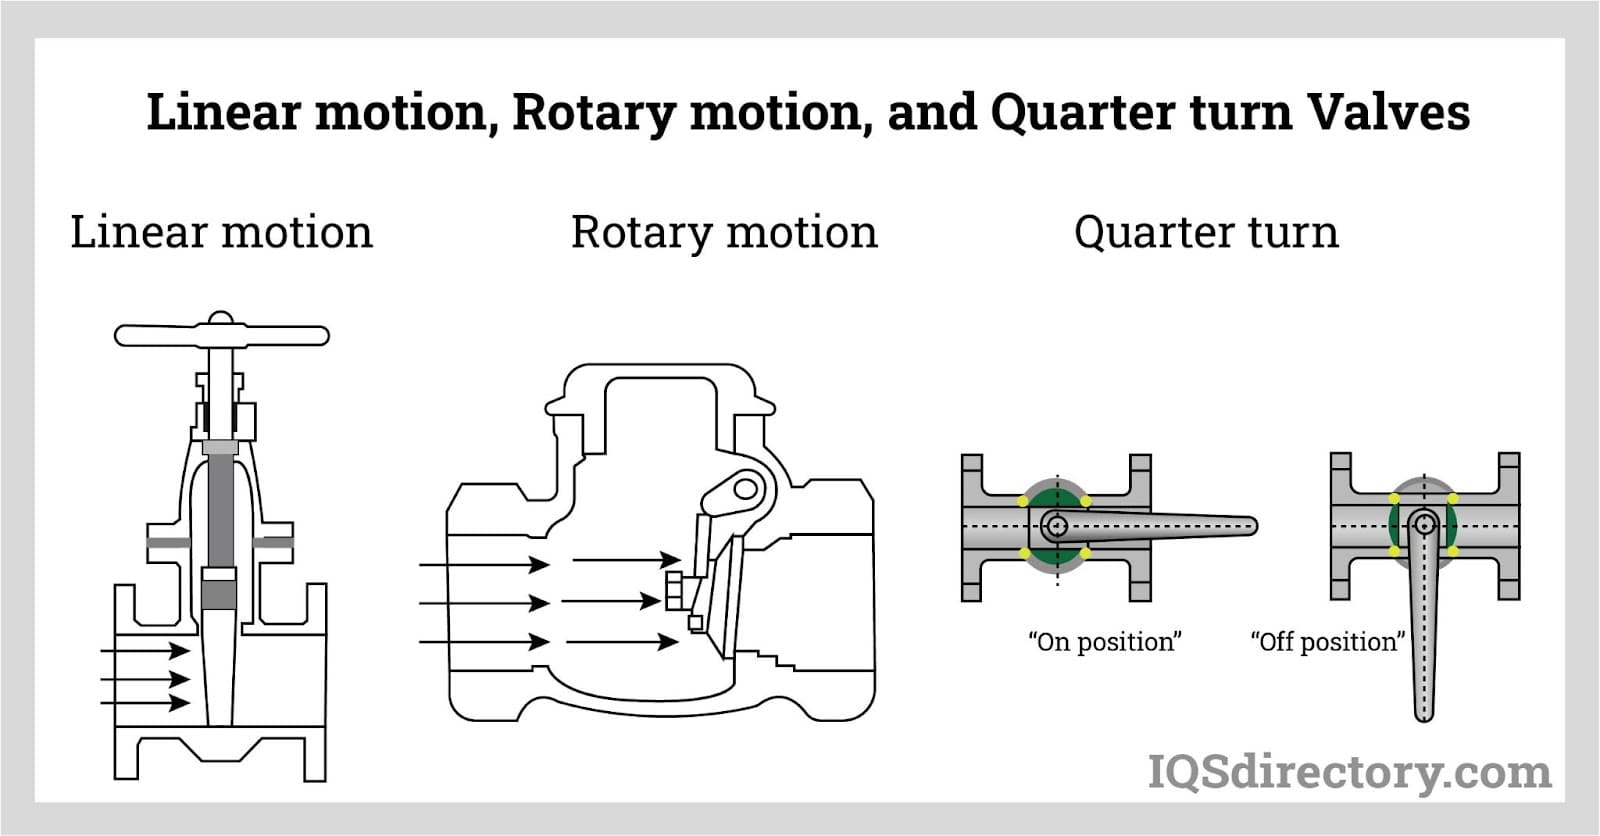 Linear Motion, Rotary Motion, and Quarter turn Valve